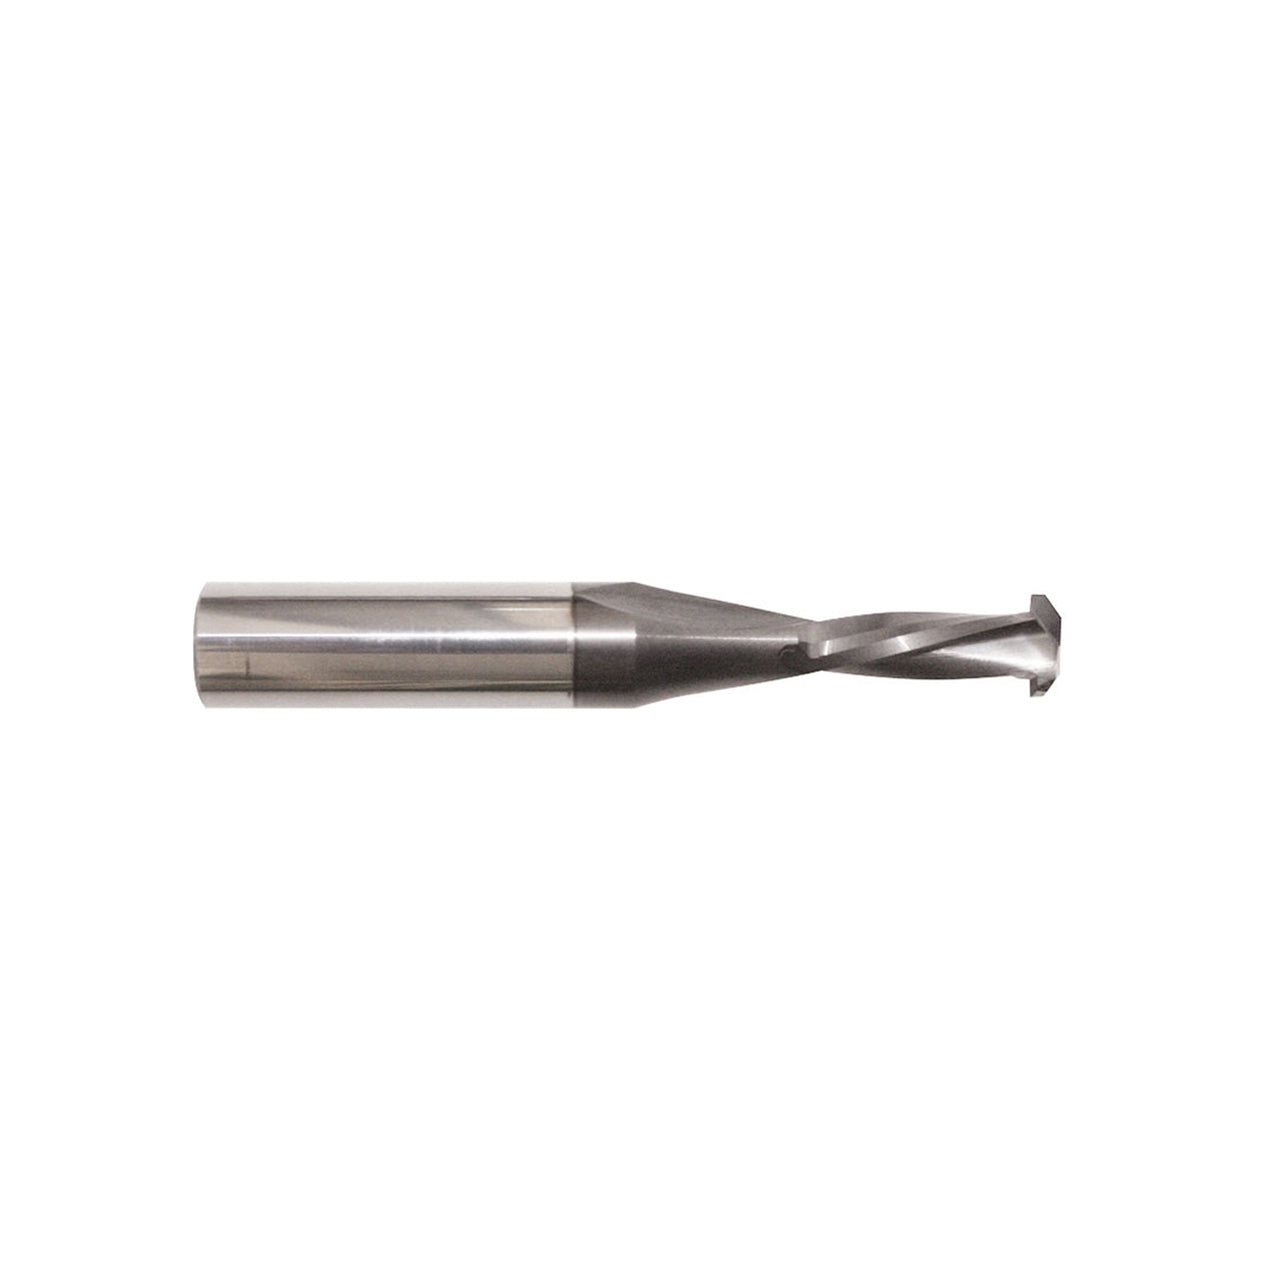 Solid carbide Lamello P-System cutter for CNC machining panel centres with 5 axes. 12 x 40mm shank, 80mm overall length. 